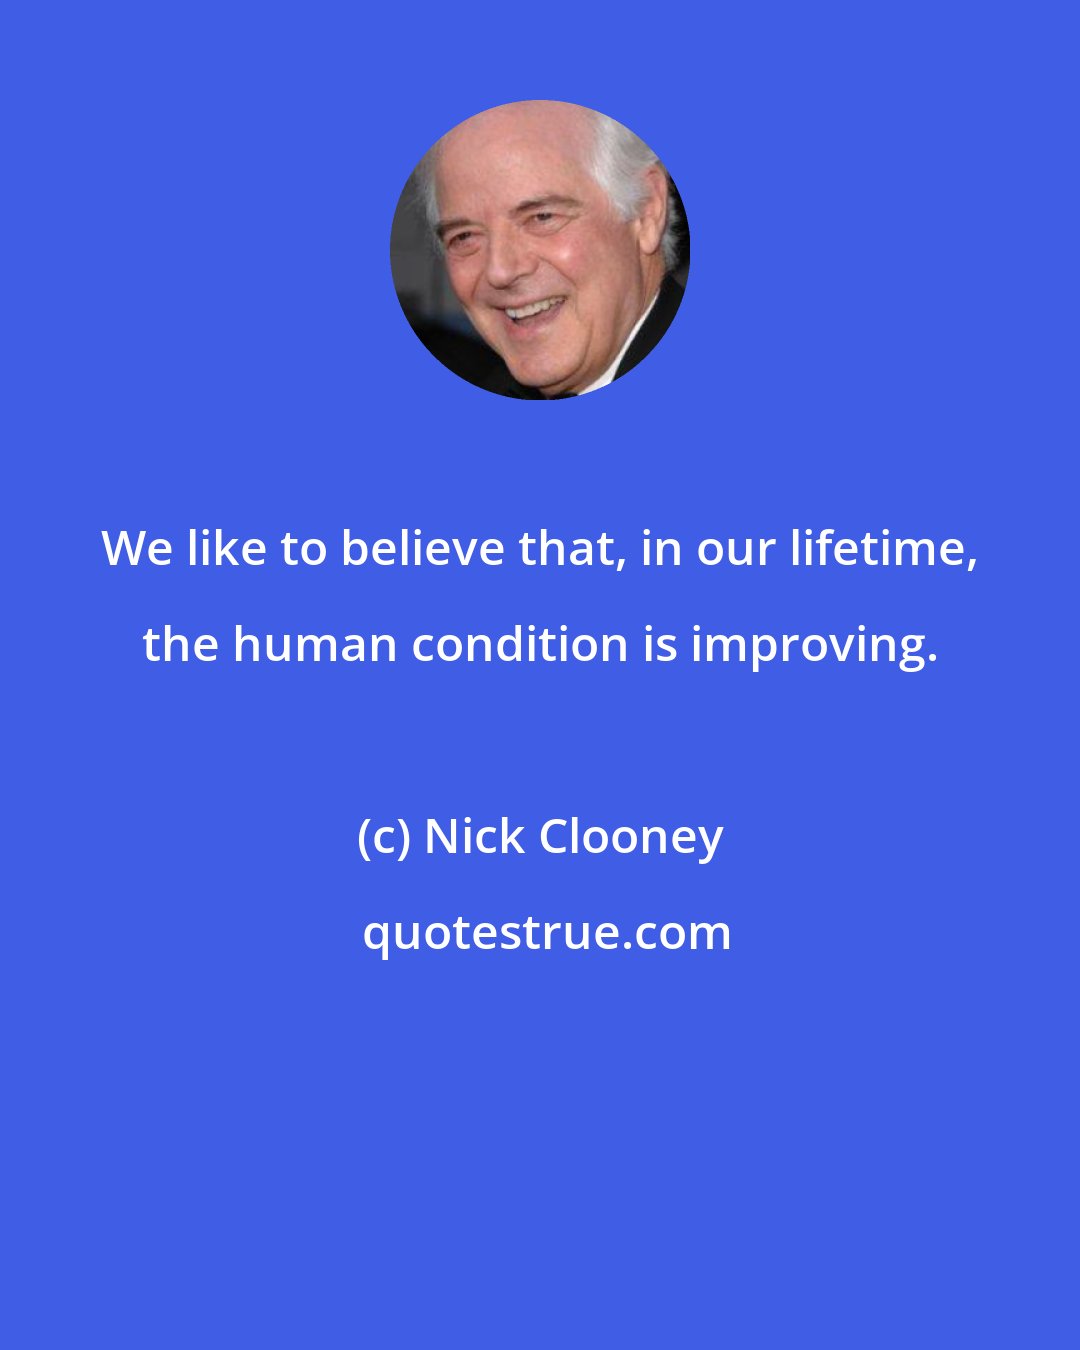 Nick Clooney: We like to believe that, in our lifetime, the human condition is improving.